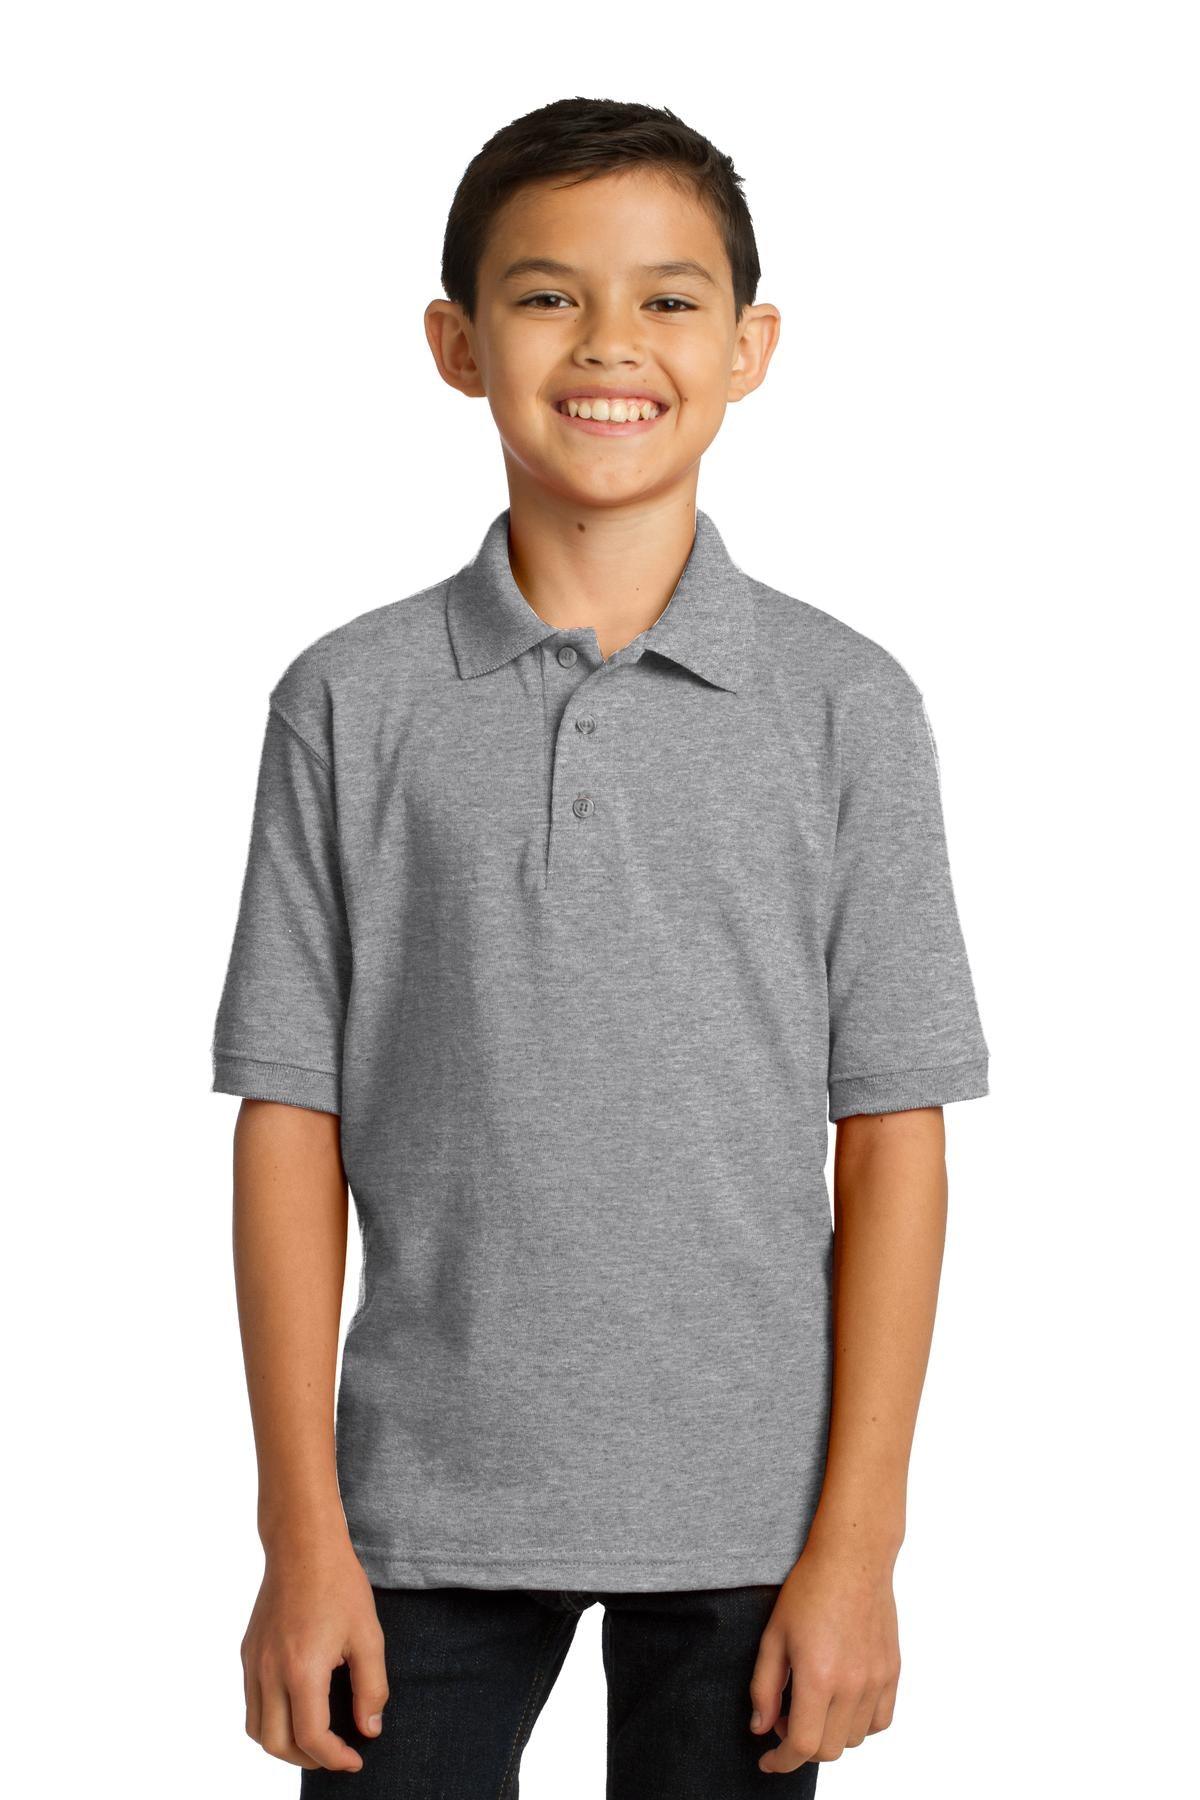 Port & Company Youth Core Blend Jersey Knit Polo. KP55Y - Dresses Max